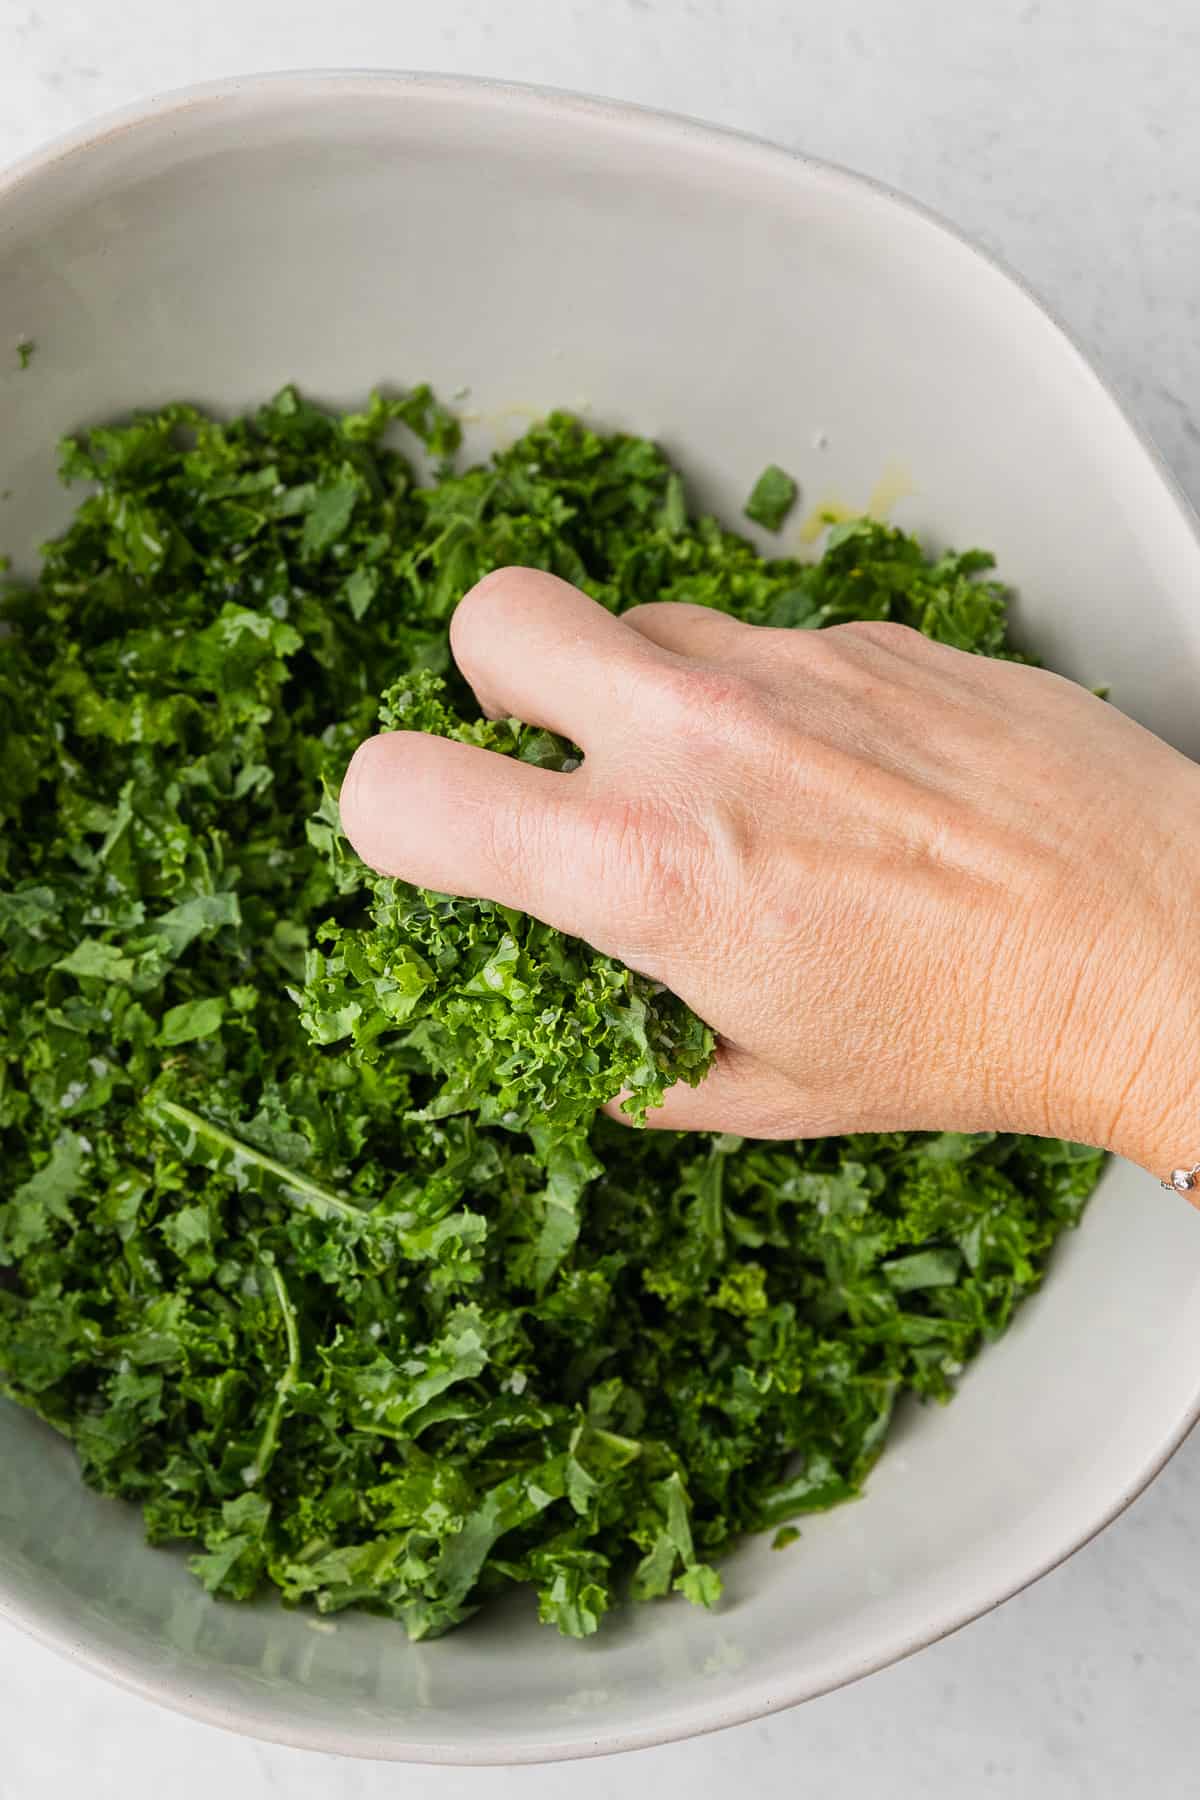 massage kale for the recipe